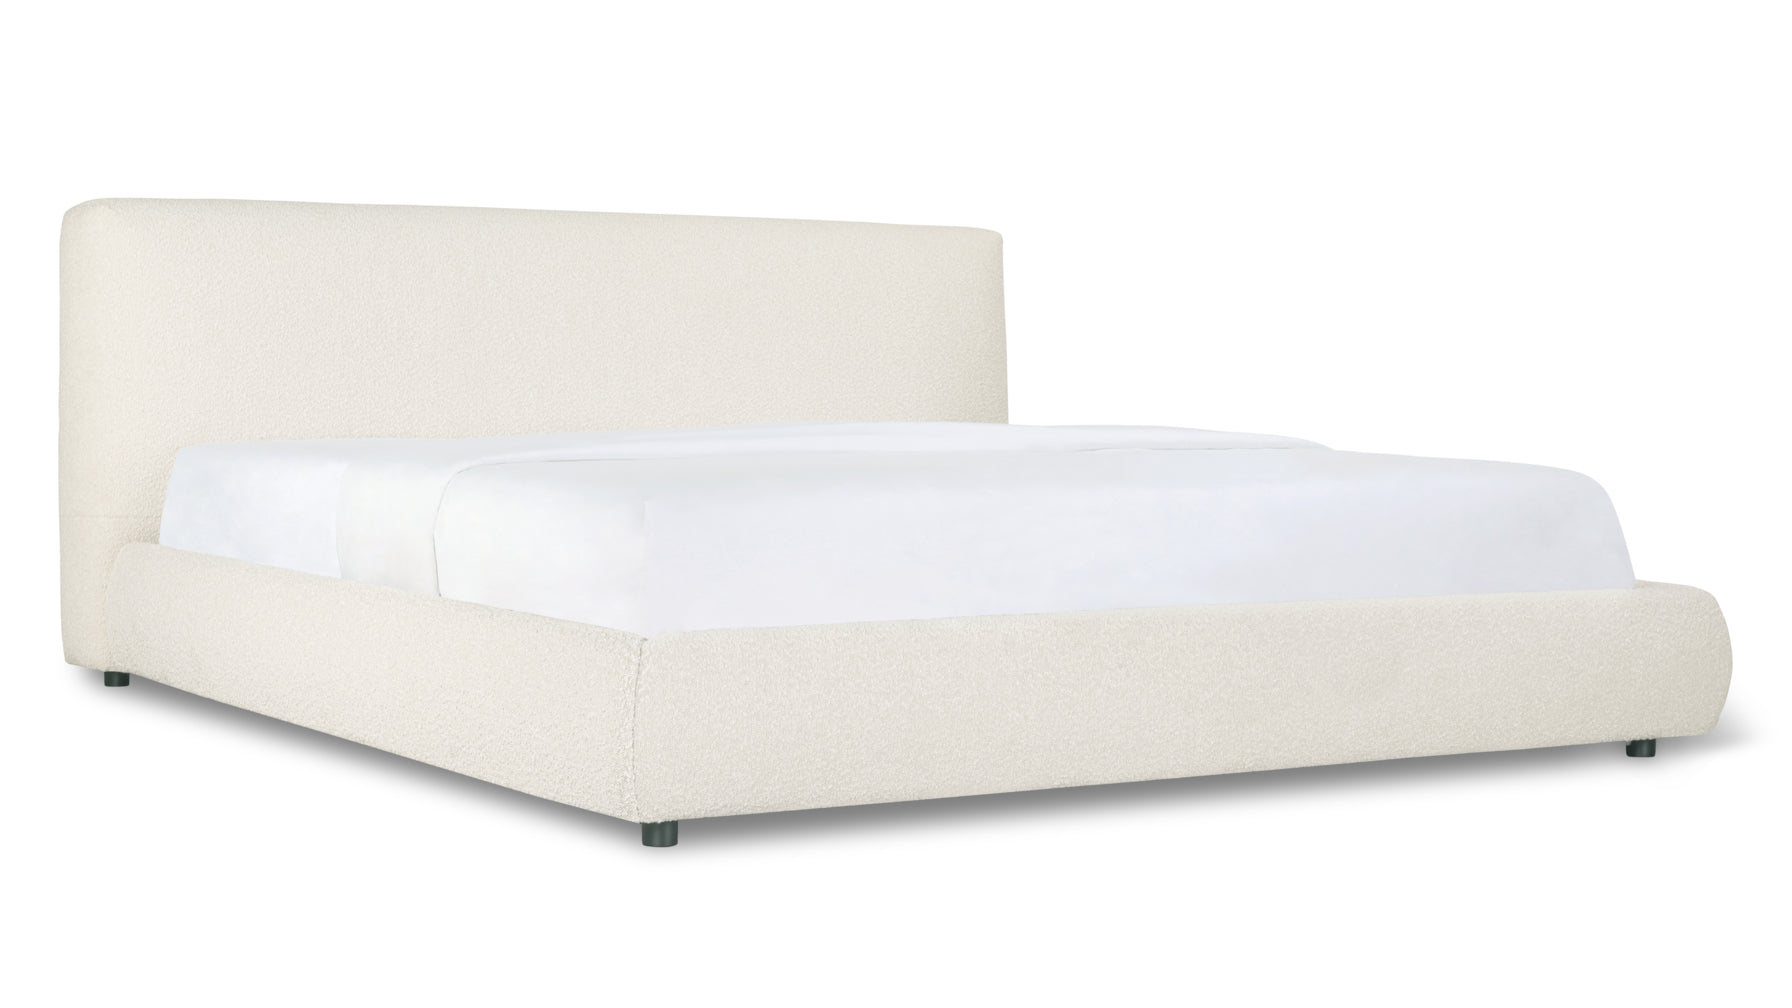 Dream Bed With Storage, King, Cream Boucle - Image 2